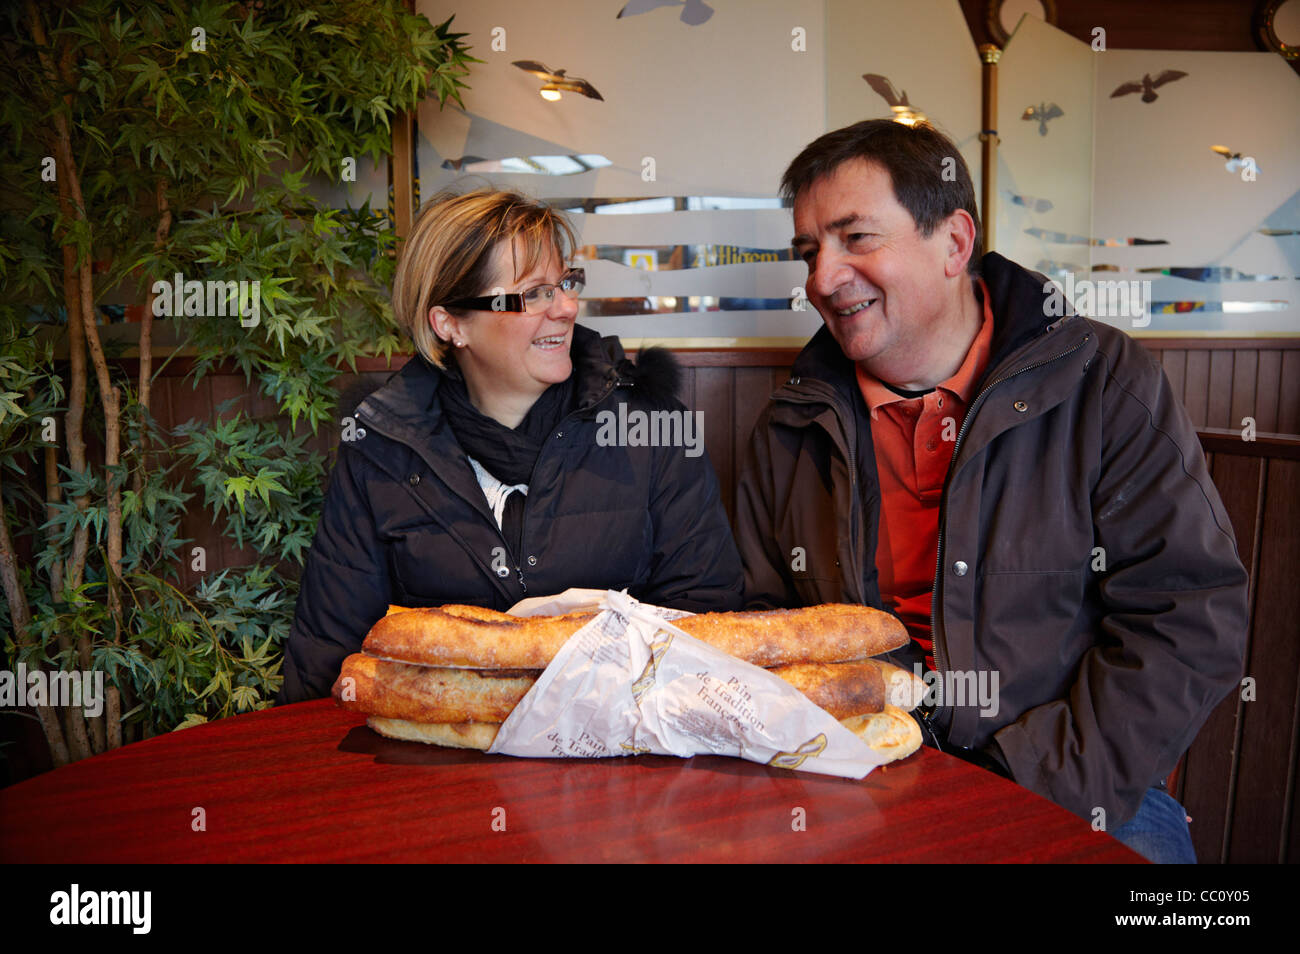 French couple chatting in a café with baguettes on their table. Le Perreux-sur-Marne, Val-de-Marne, France. Stock Photo